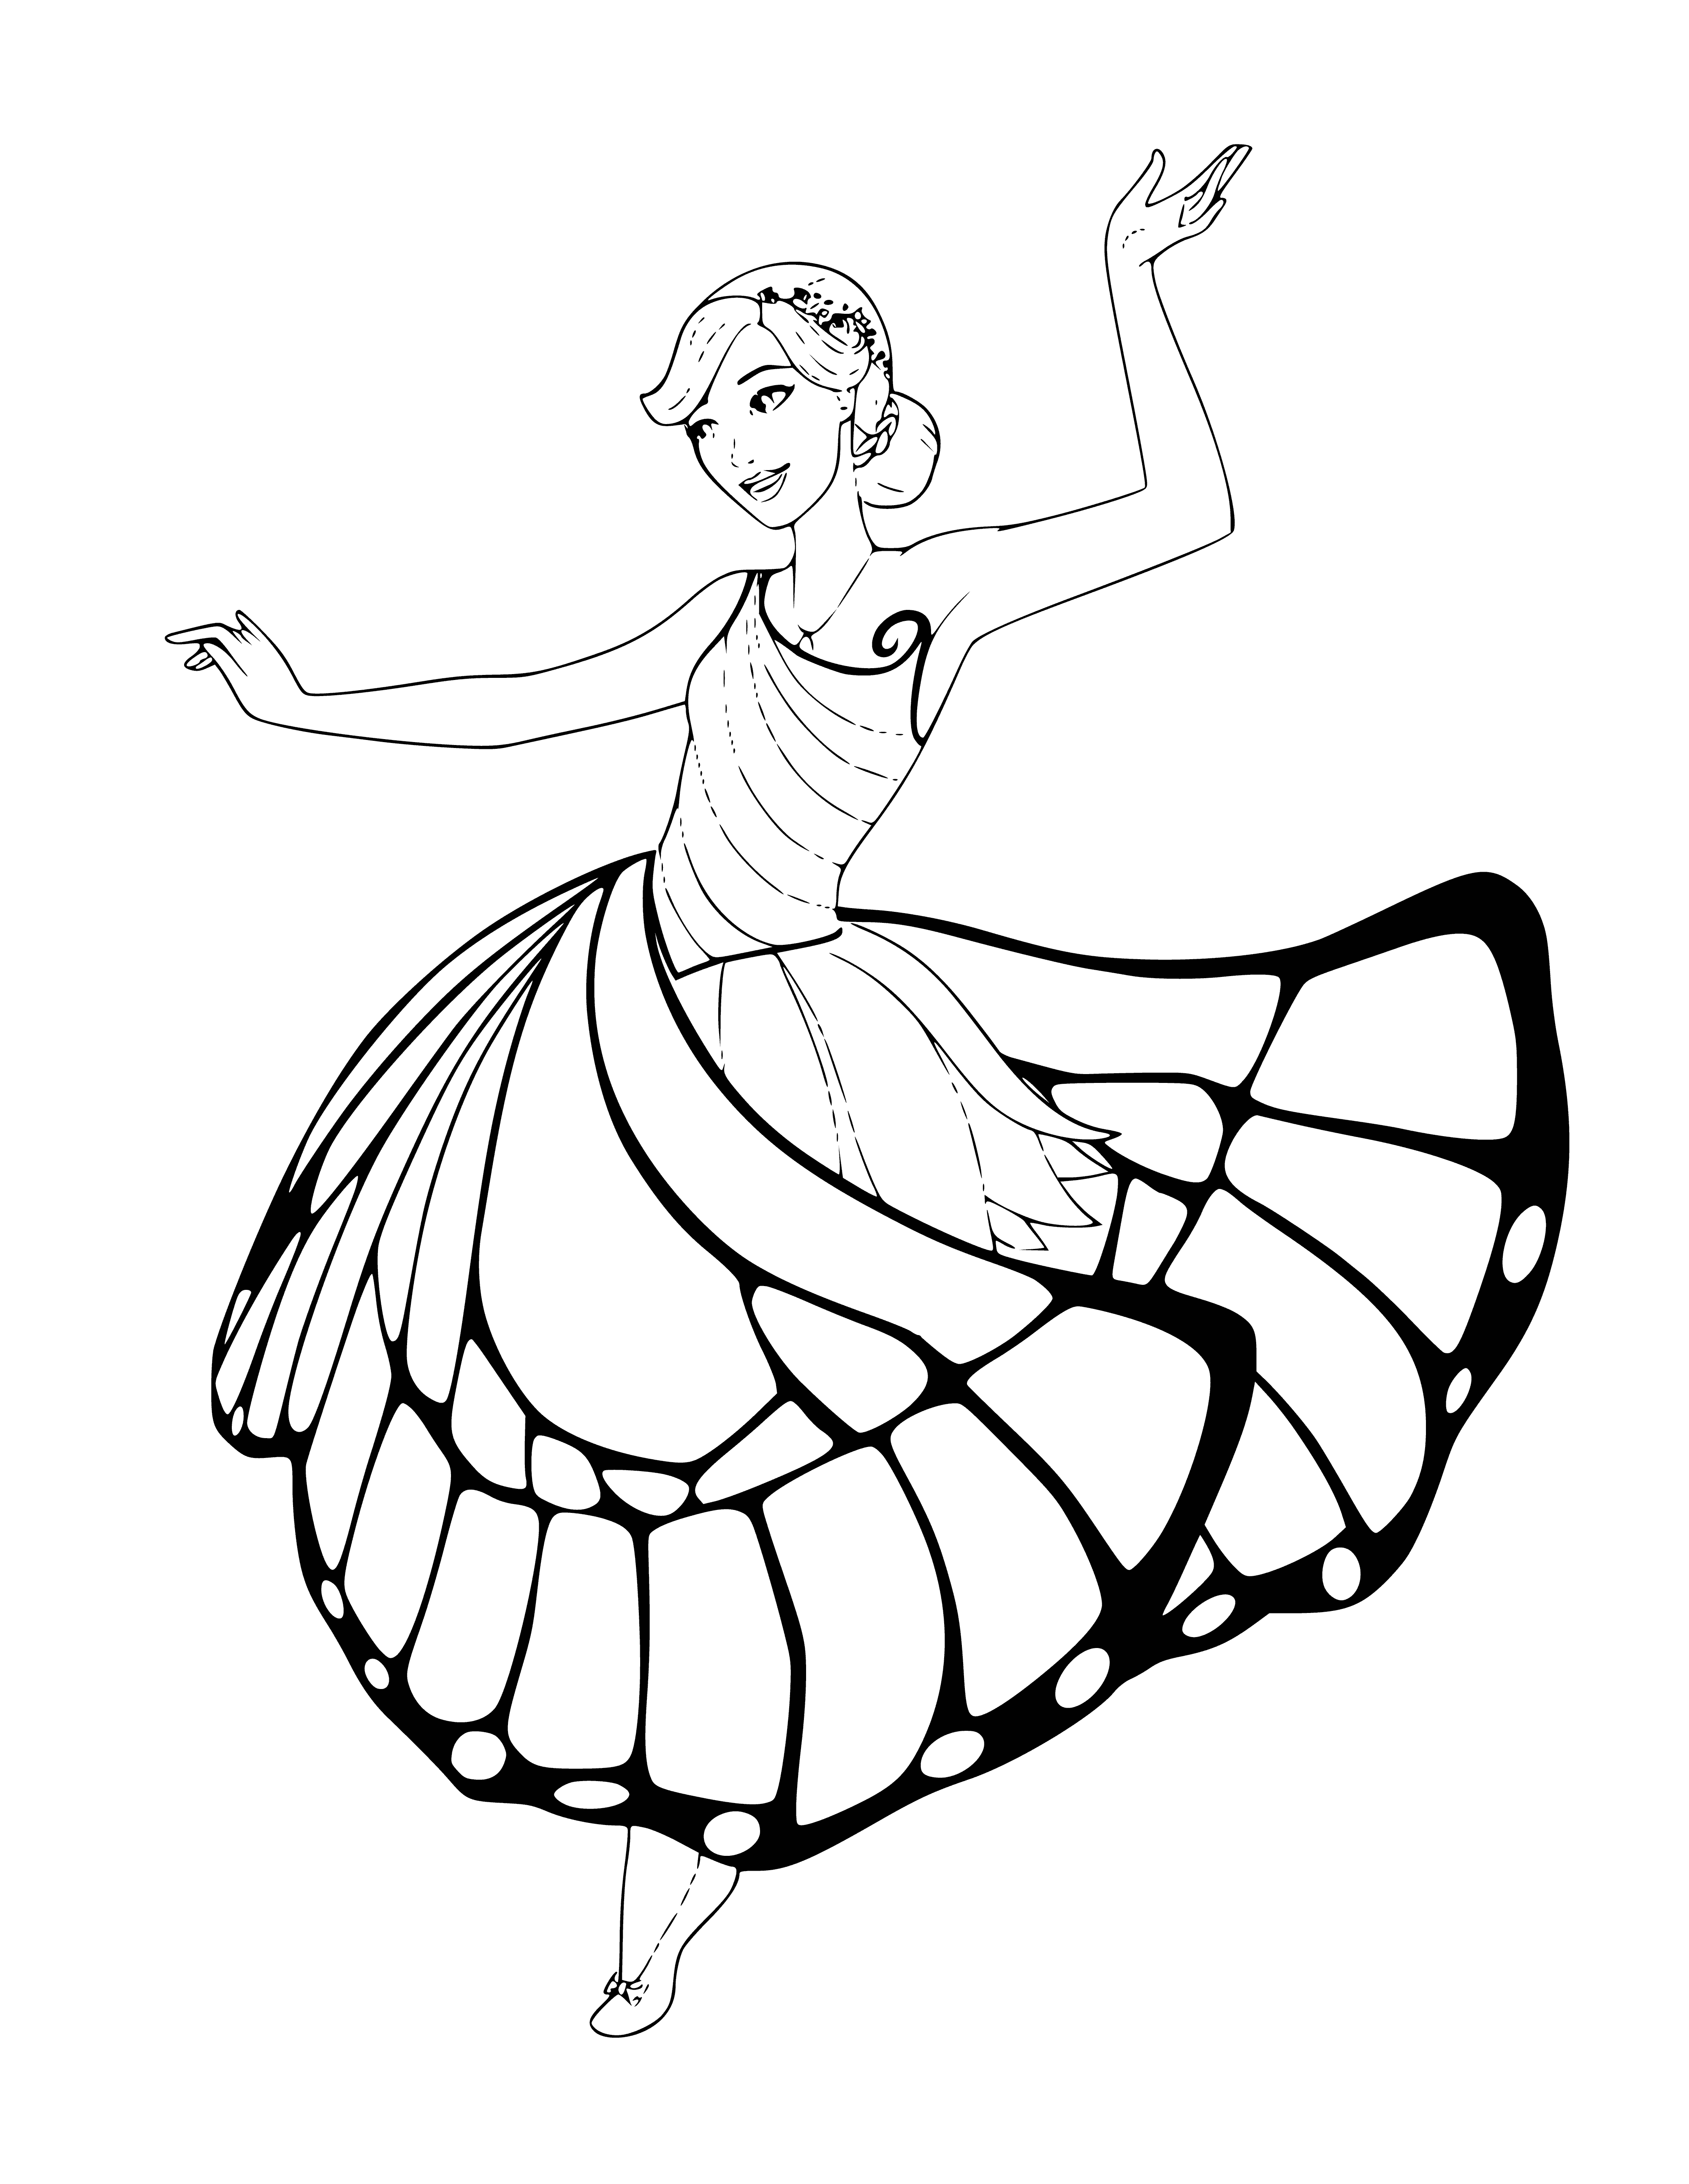 Fairy-baobchka is spinning in a dance coloring page